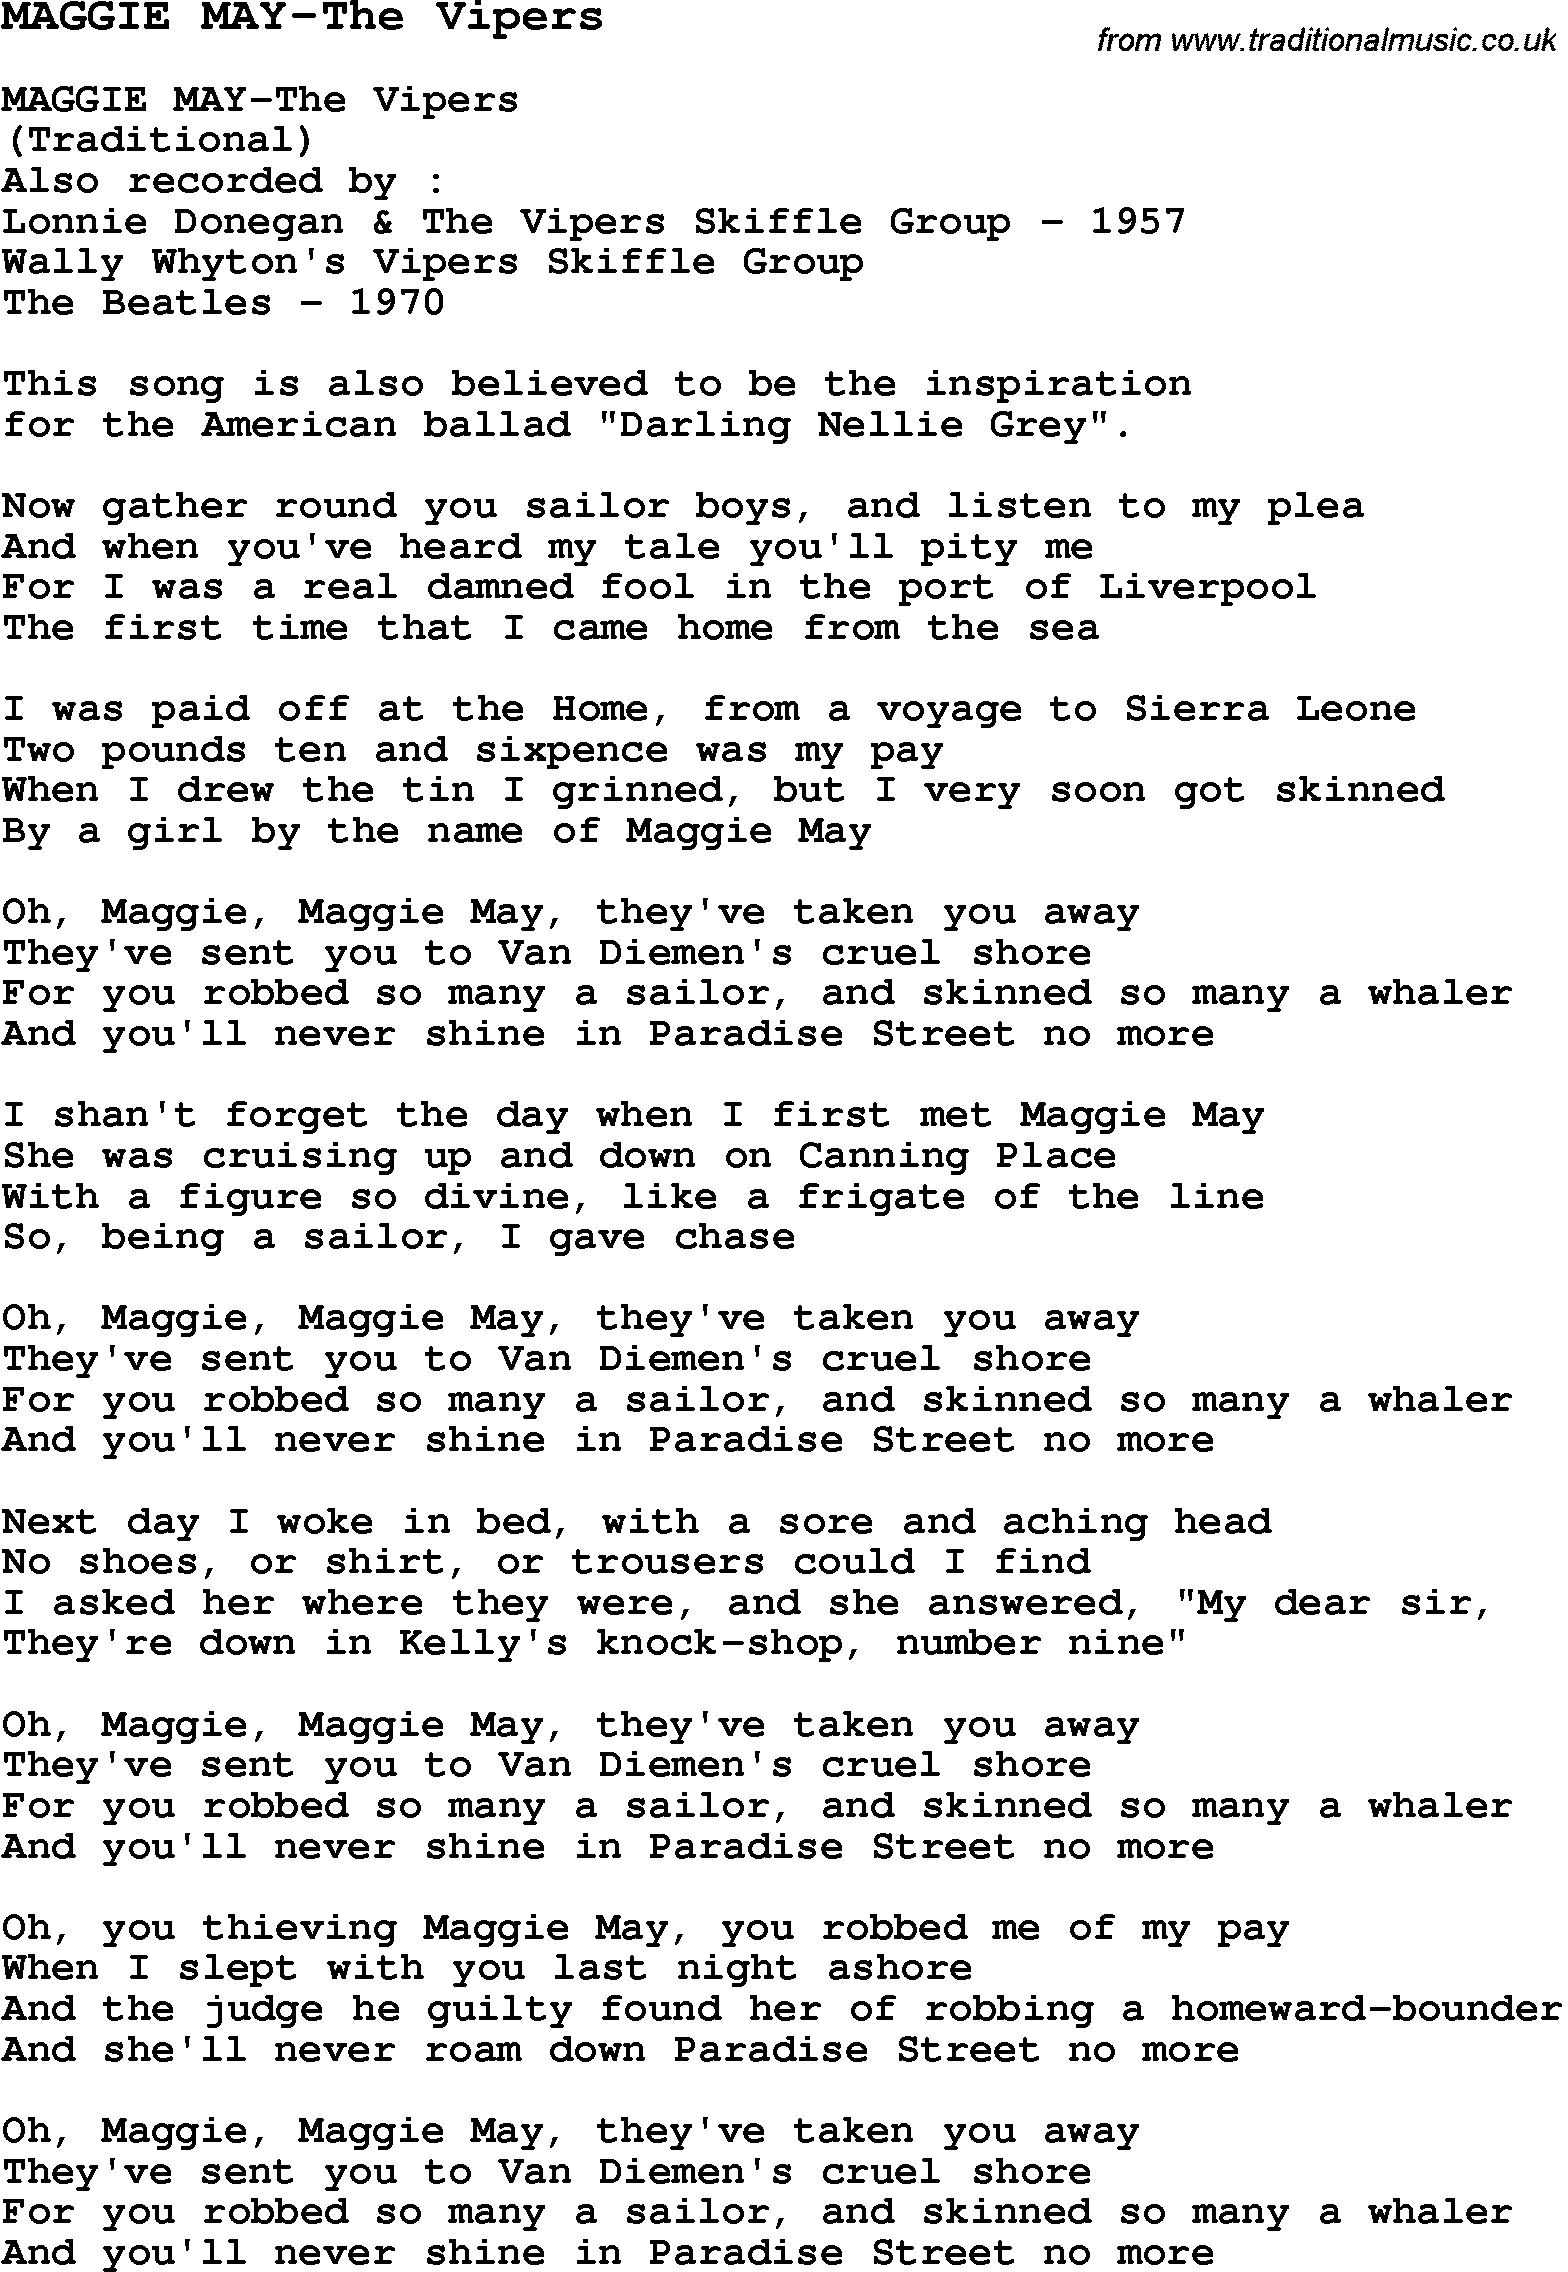 Skiffle Song Lyrics for Maggie May-The Vipers.